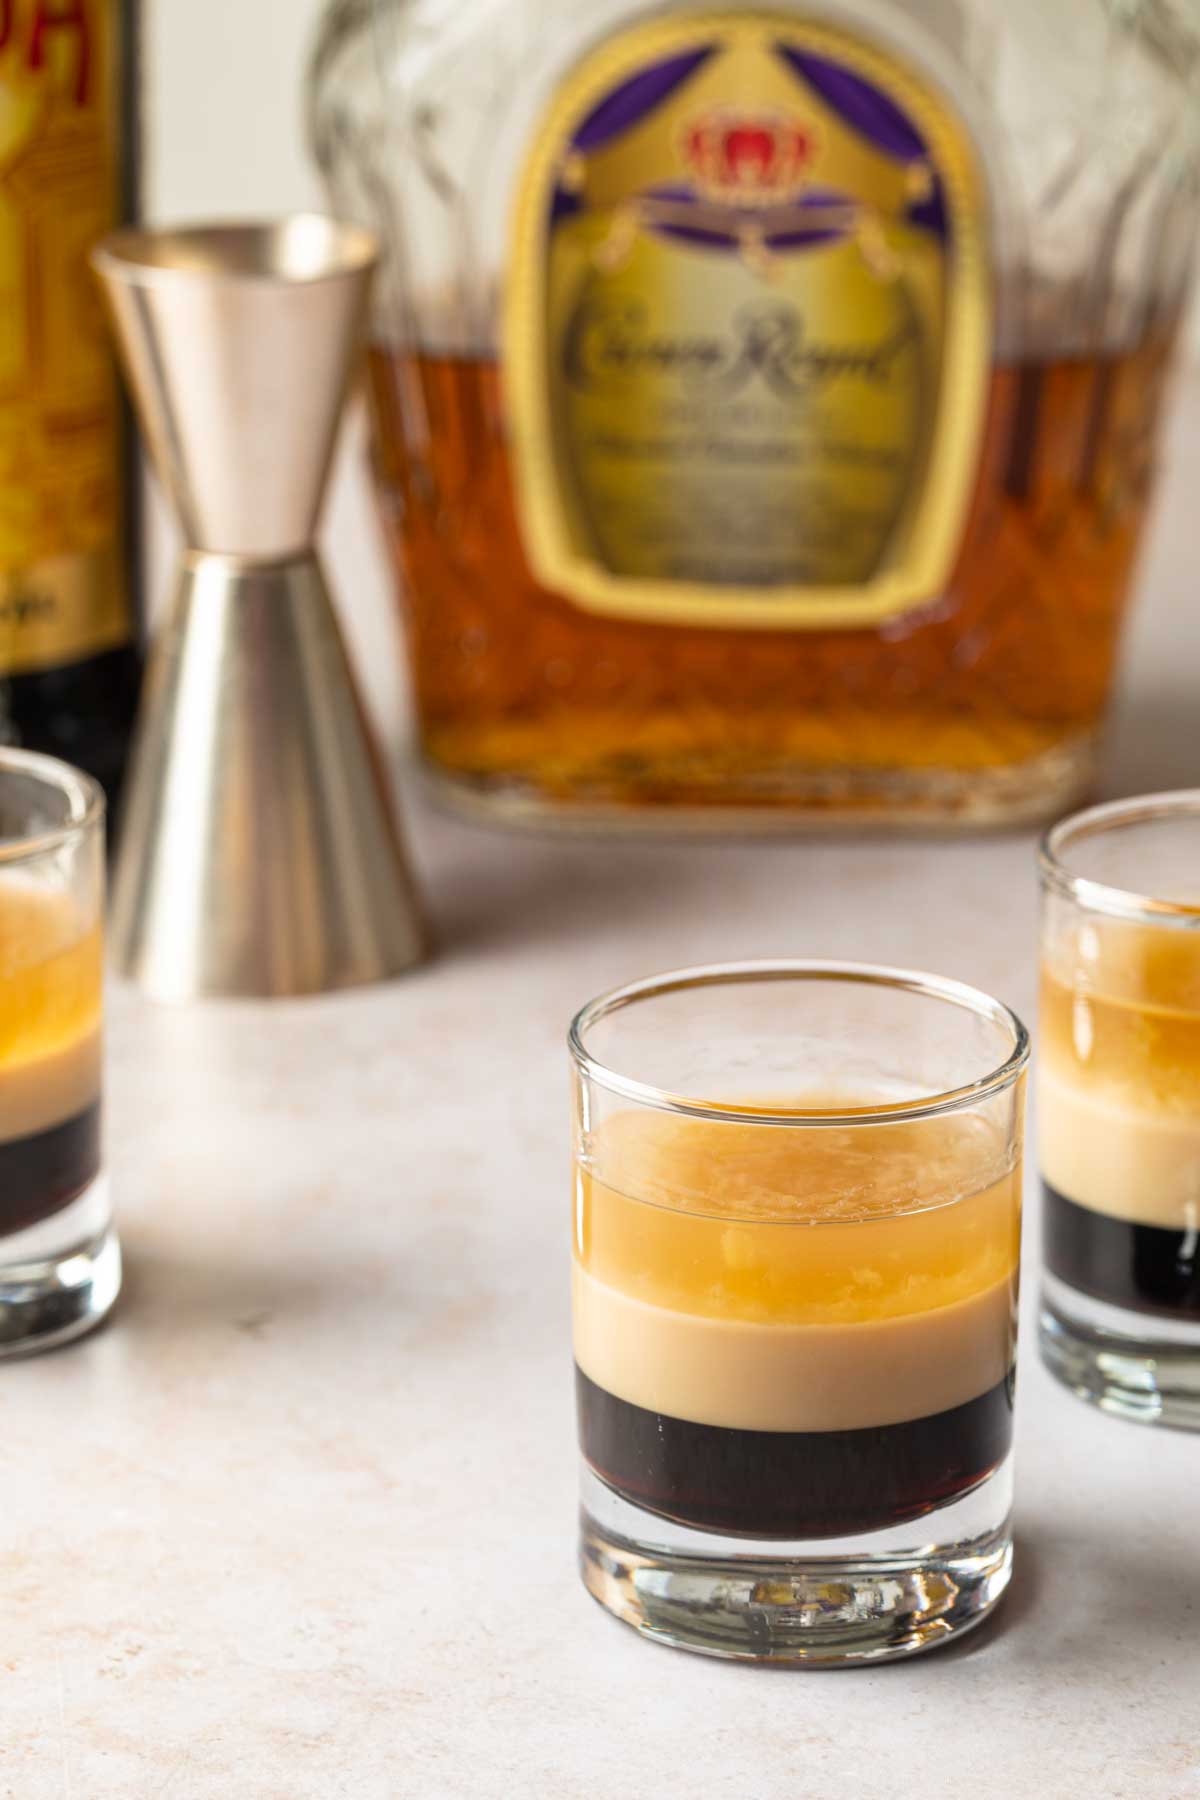 Duck fart shots with the bottles of crown royal, baileys, and kahlua in the background. 